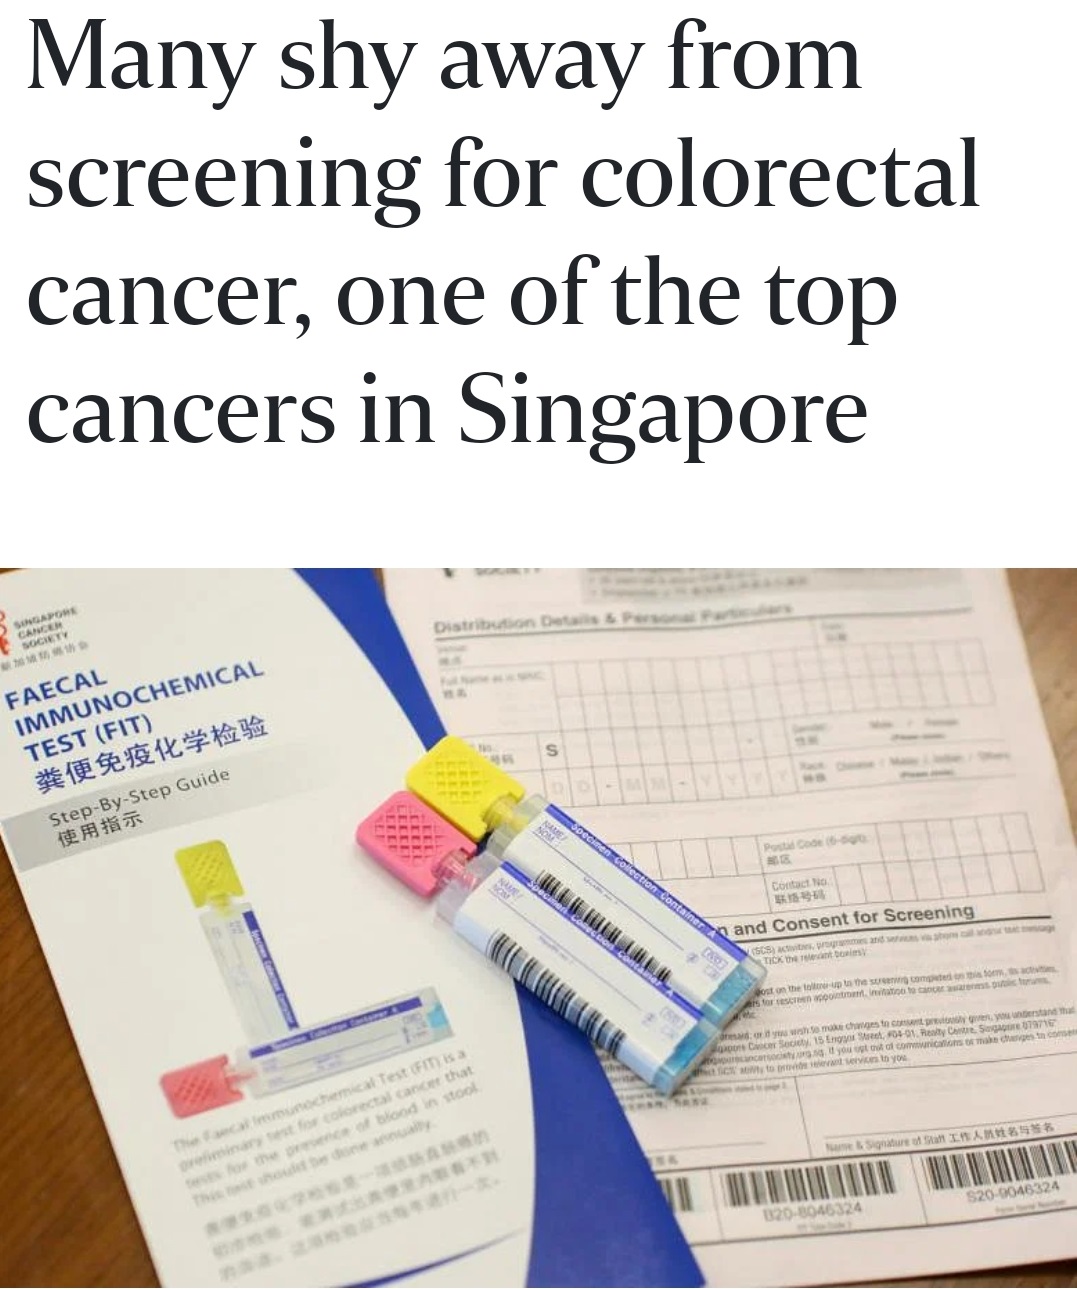 Many shy away from screening for colorectal cancer